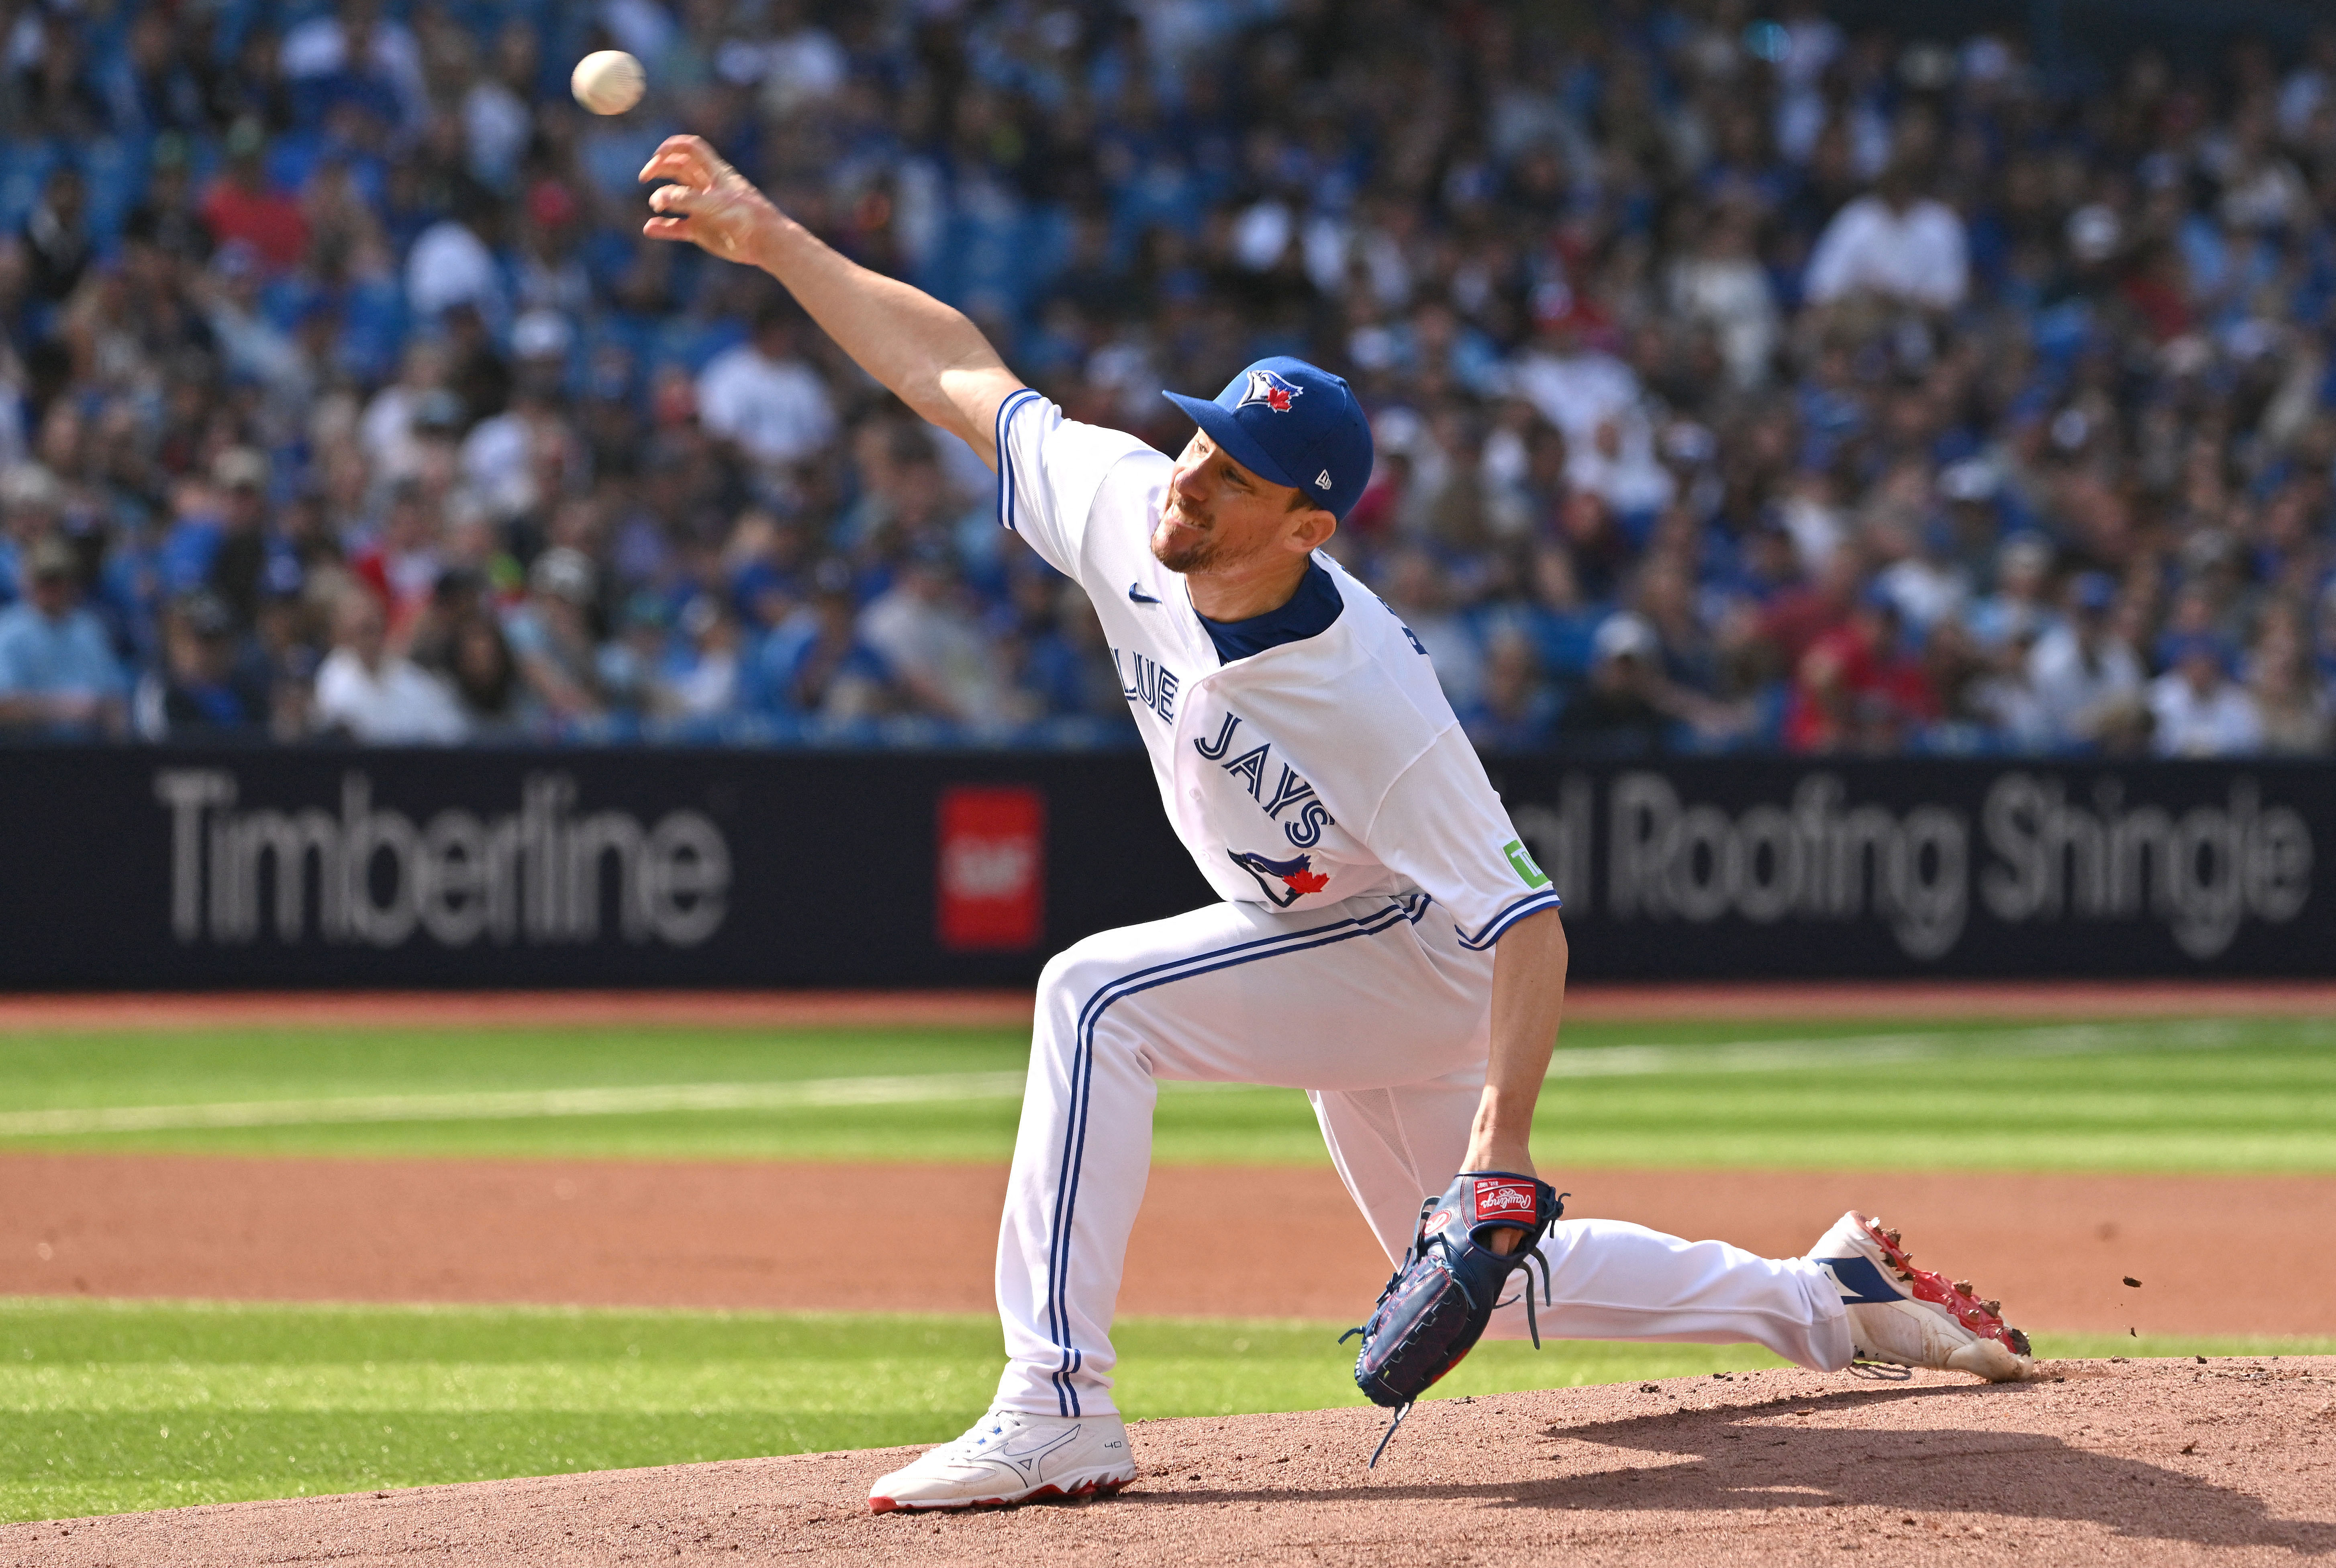 Merrifield has winning hit in 13th inning as Blue Jays rally past Red